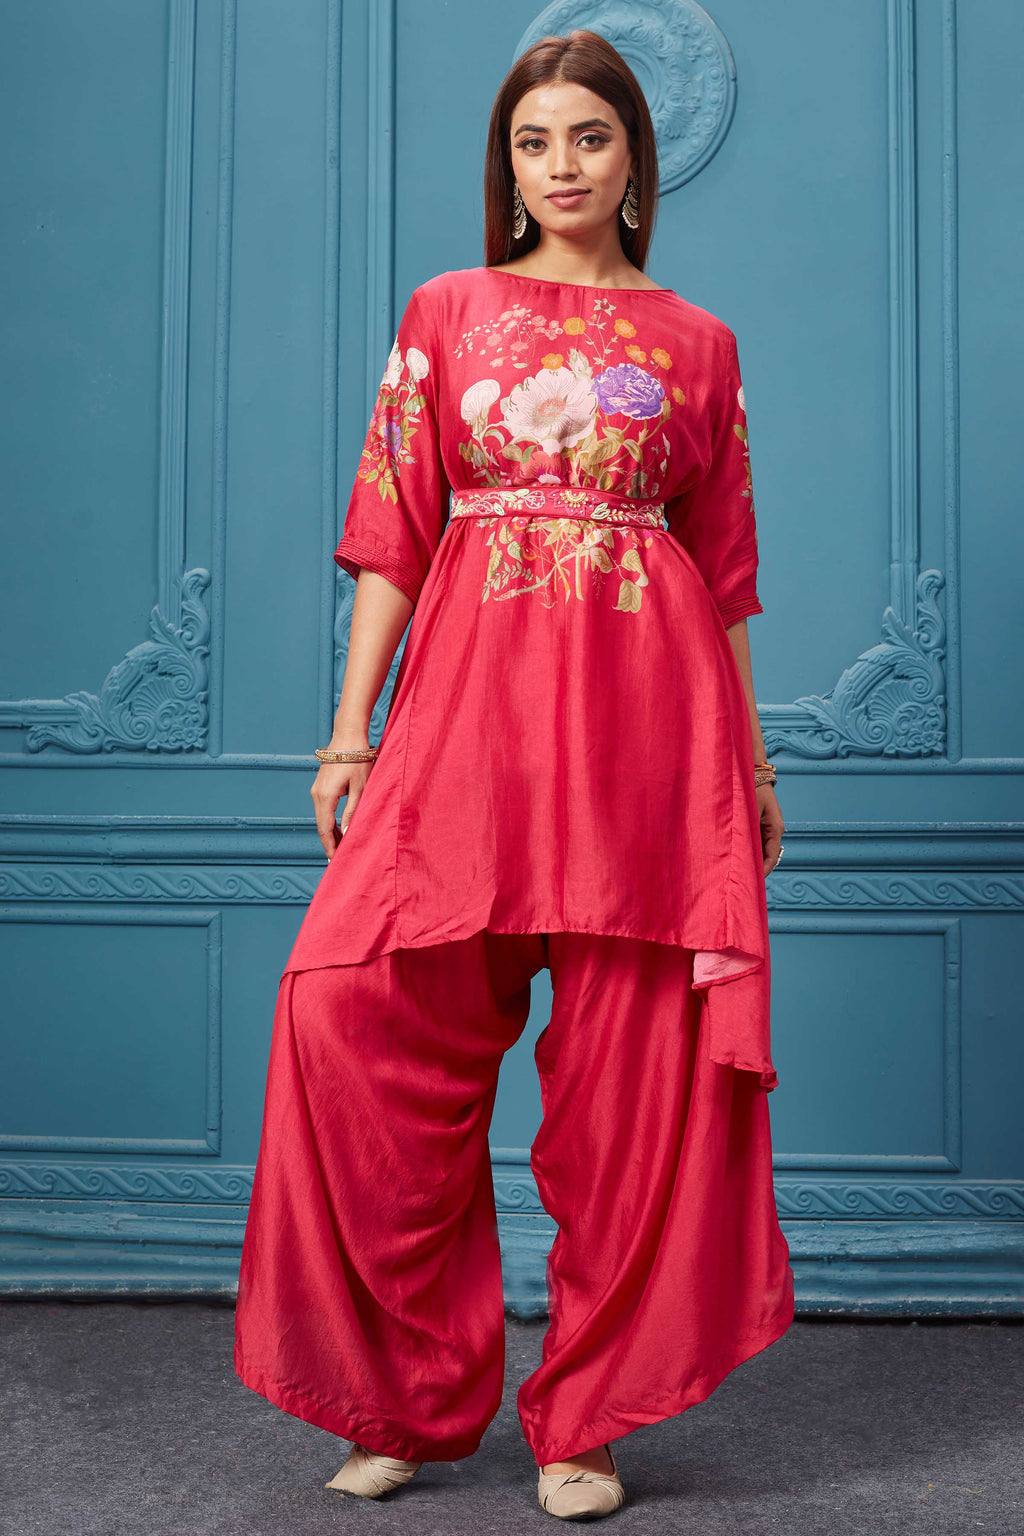 Shop this Gorgeous red suit set with floral embroidery in front featuring quarter sleeves and a belt to give a stylish look. Shop Indian wear online at Pure Elegance or visit our store in the USA.